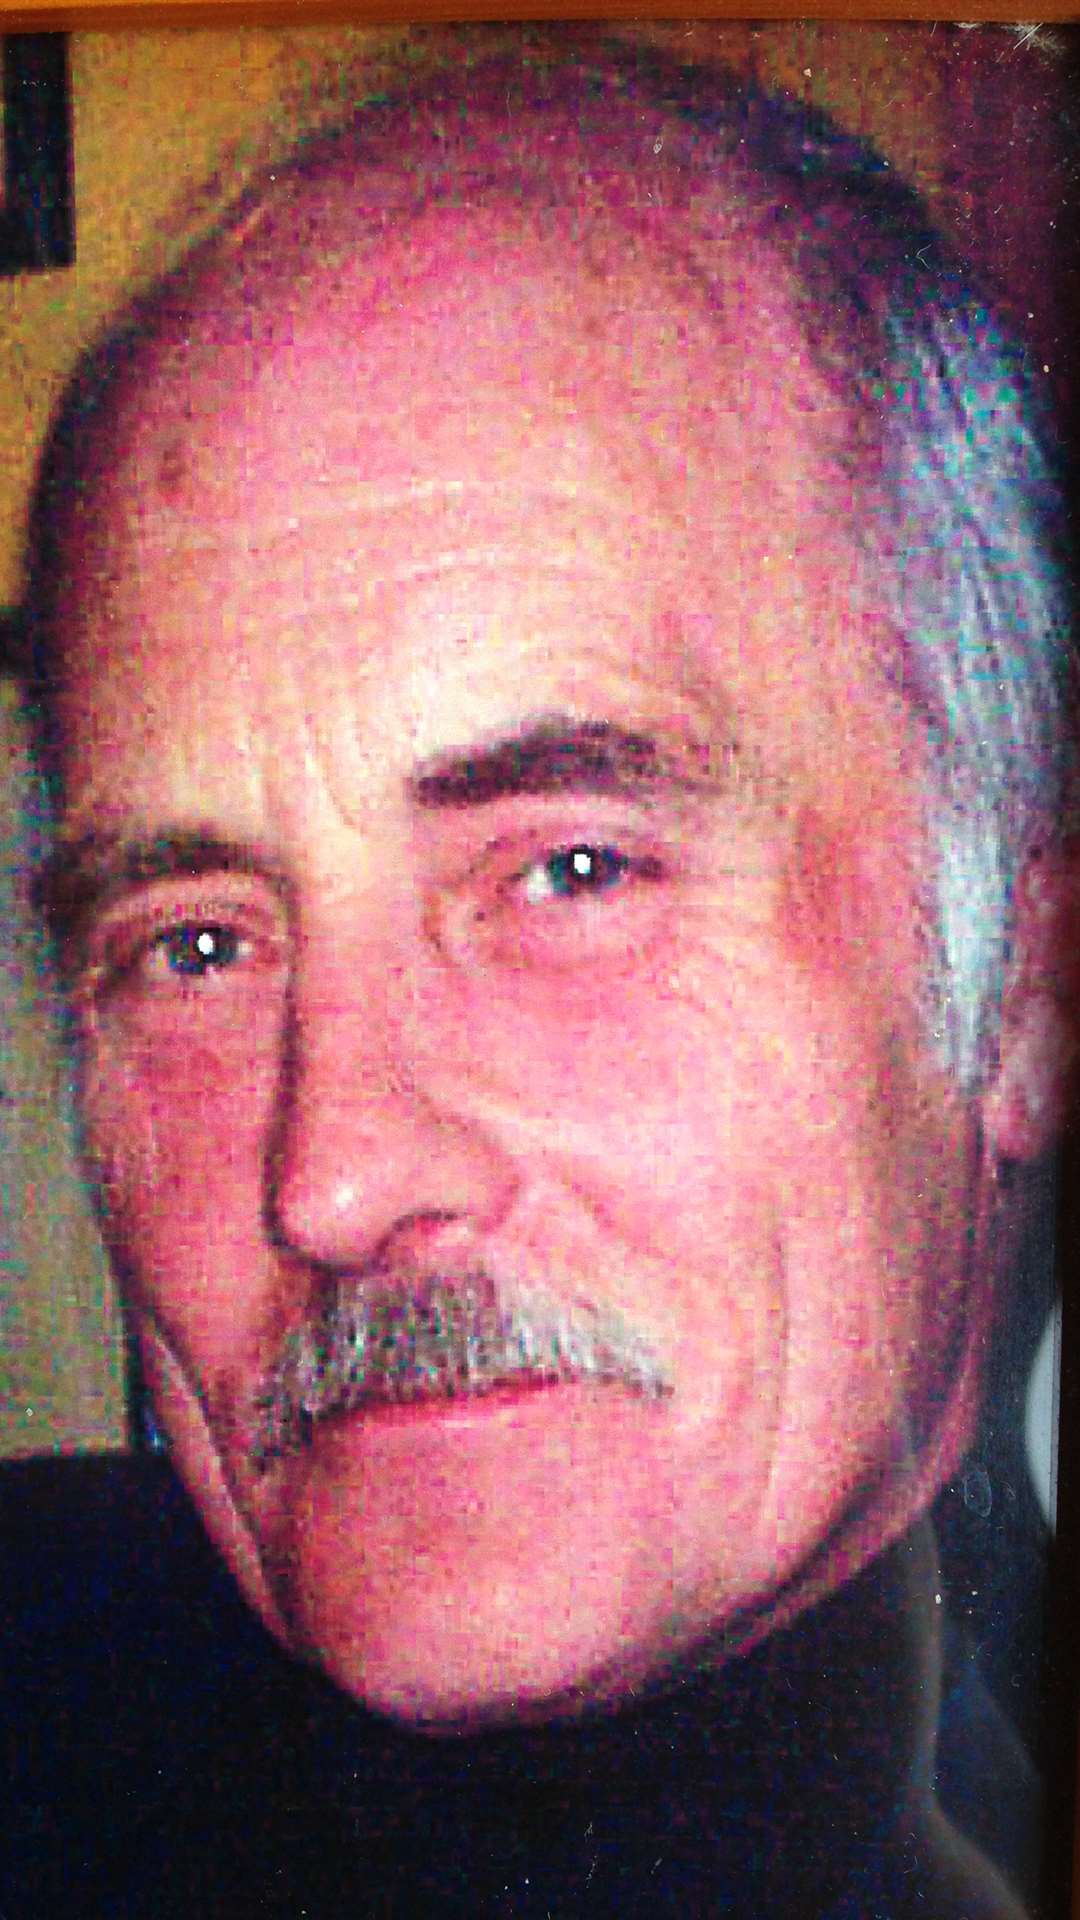 Brian Peek died while making a delivery in Wittersham in 2006